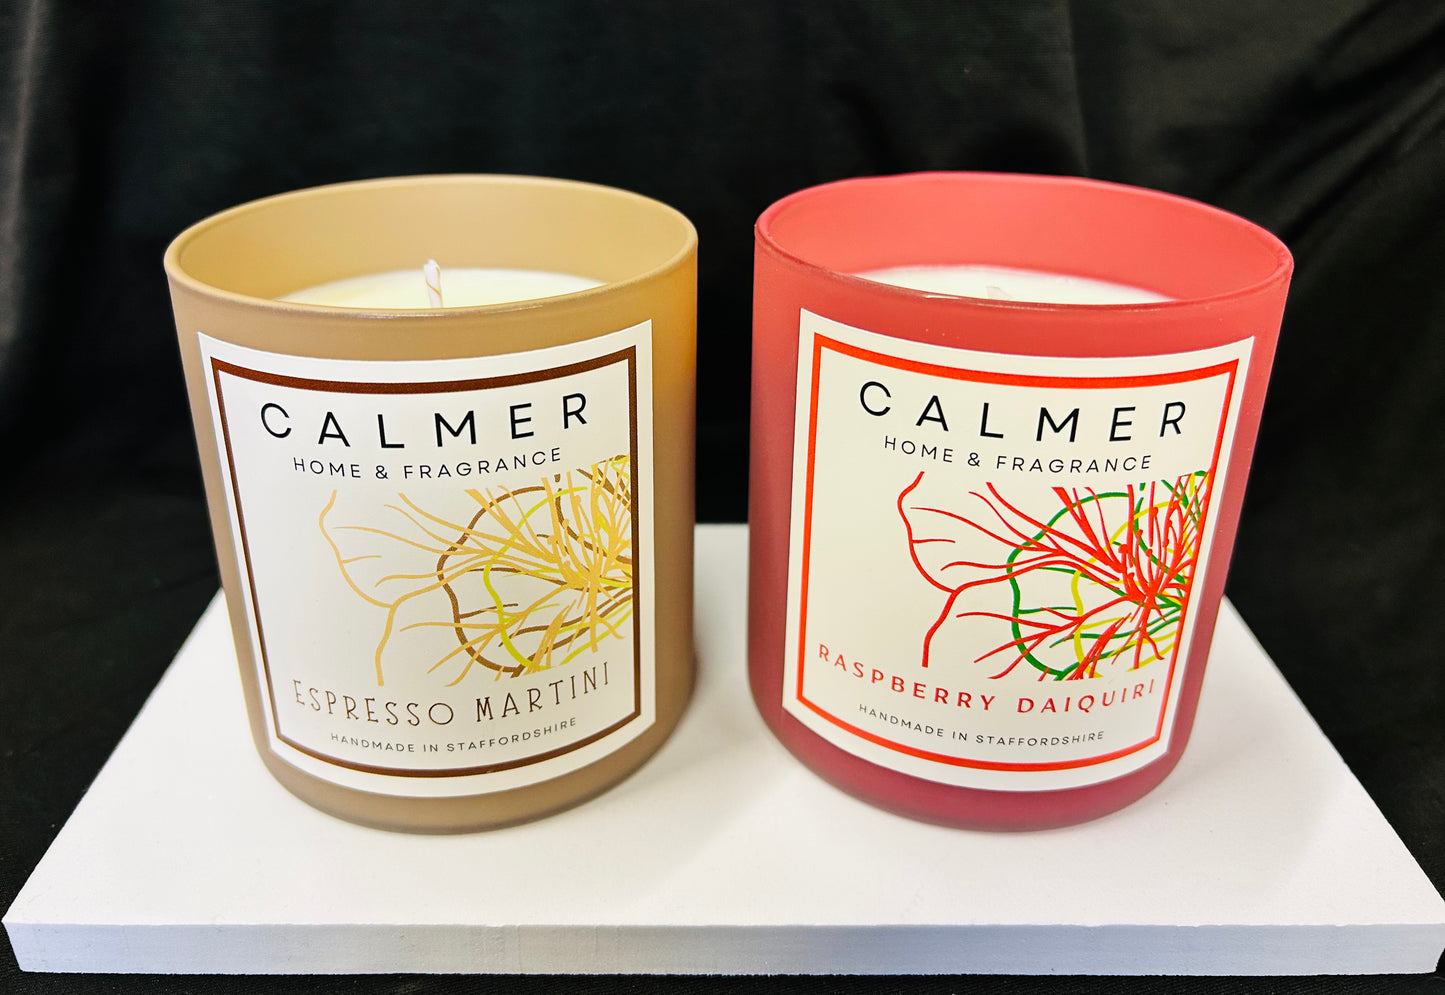 cocktail candles, cocktail inspired, espresso martini, raspberry daiquiri, cocktail scented candles, calmer home fragrance